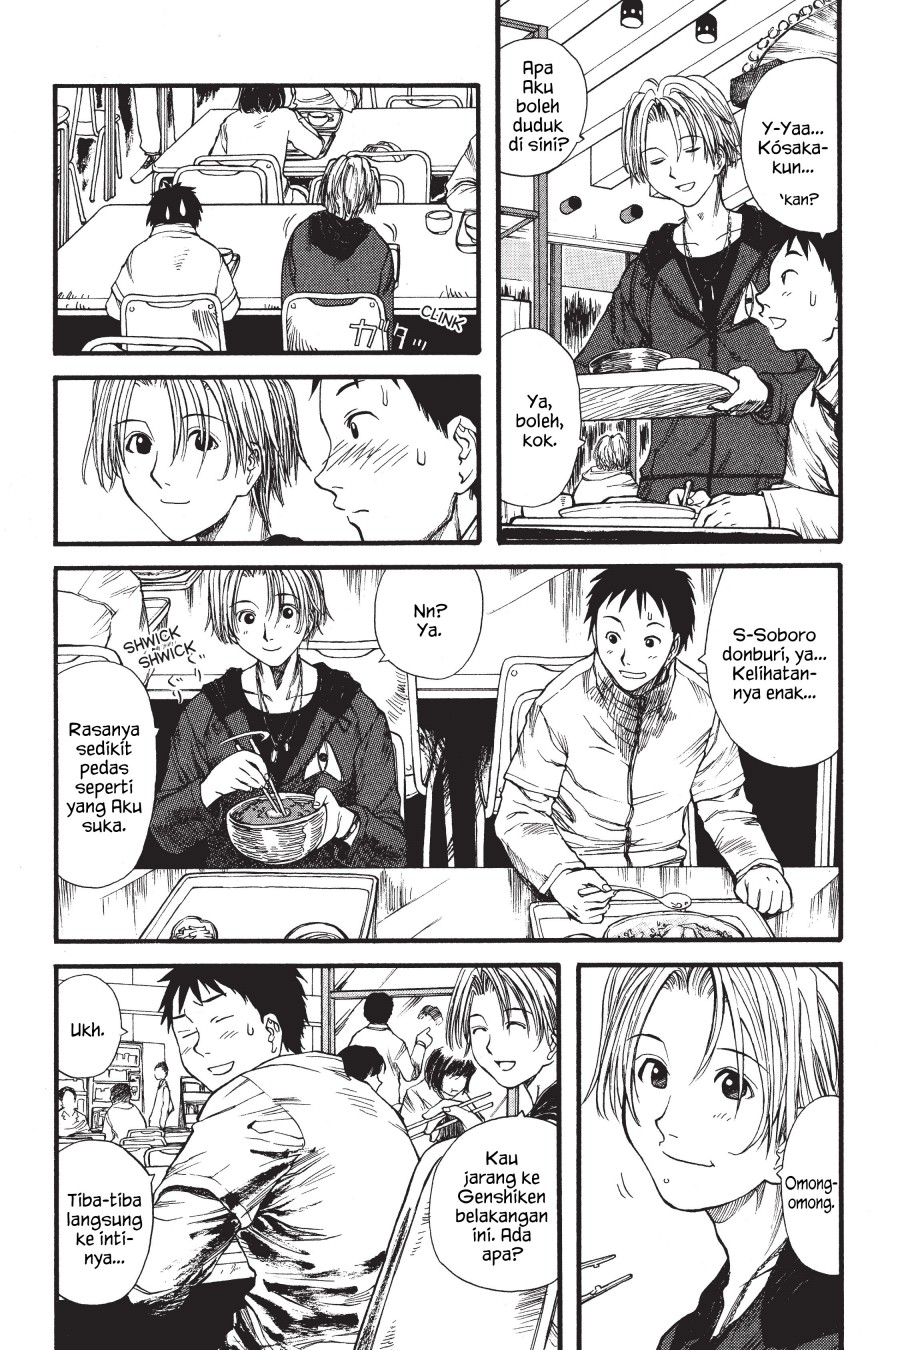 Genshiken – The Society for the Study of Modern Visual Culture Chapter 02 Image 3